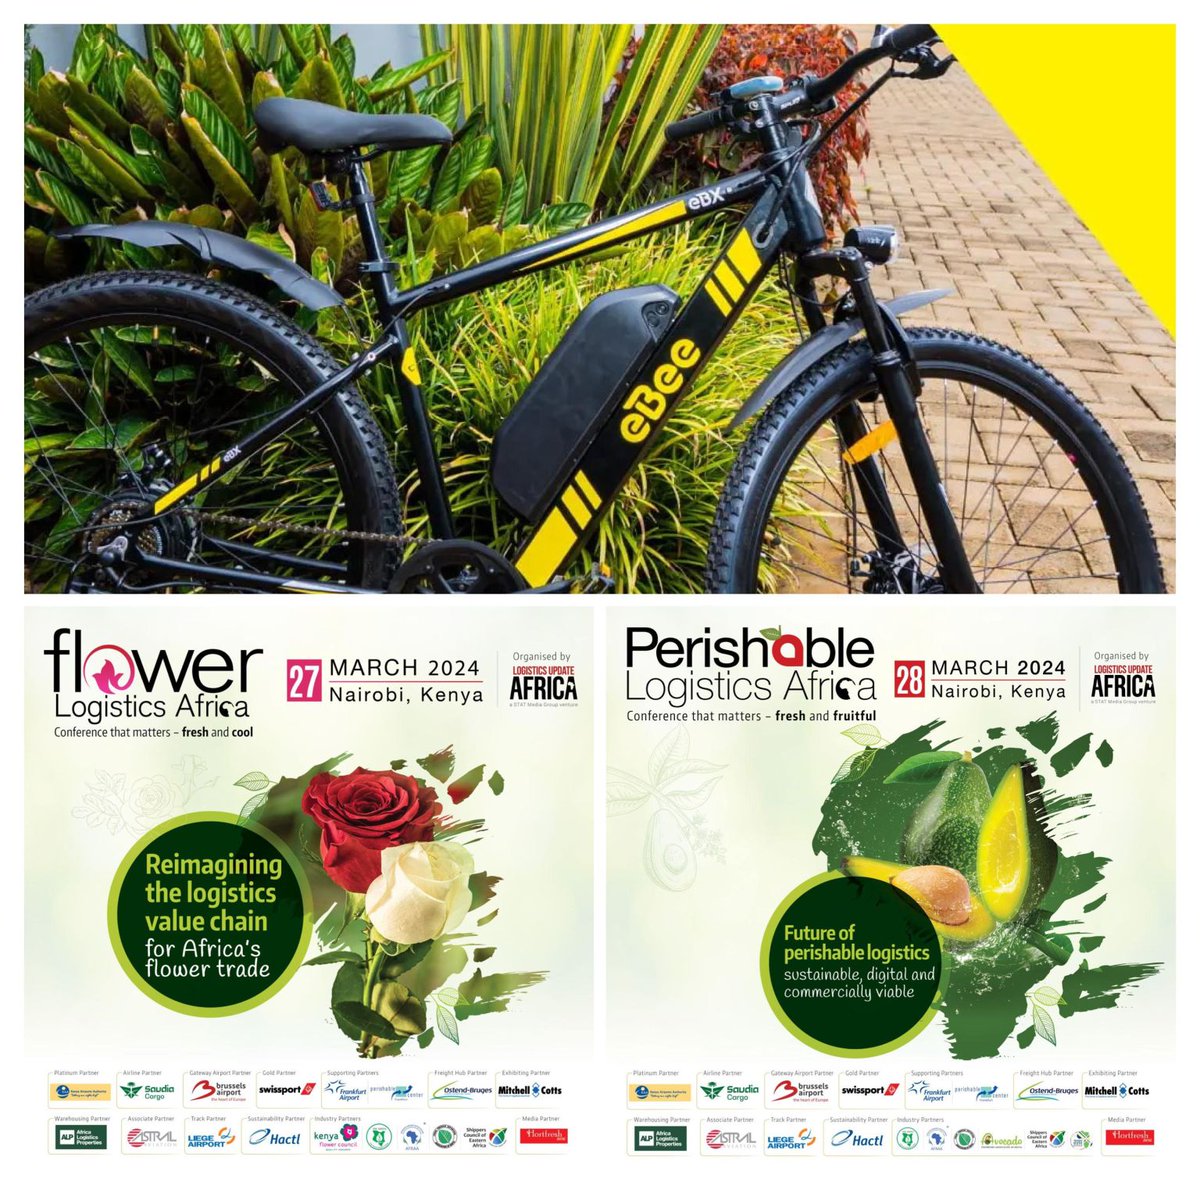 🌺🚛 Calling all flower and perishable growers and shippers! 🌿🚚

🎉 Exciting news alert! 🎉 we're thrilled to announce an exclusive opportunity just for you: the chance to win an incredible #eBeeBike - #ElectricBicycle Built for #Africa!

#fla #pla #nairobi #luckydraw